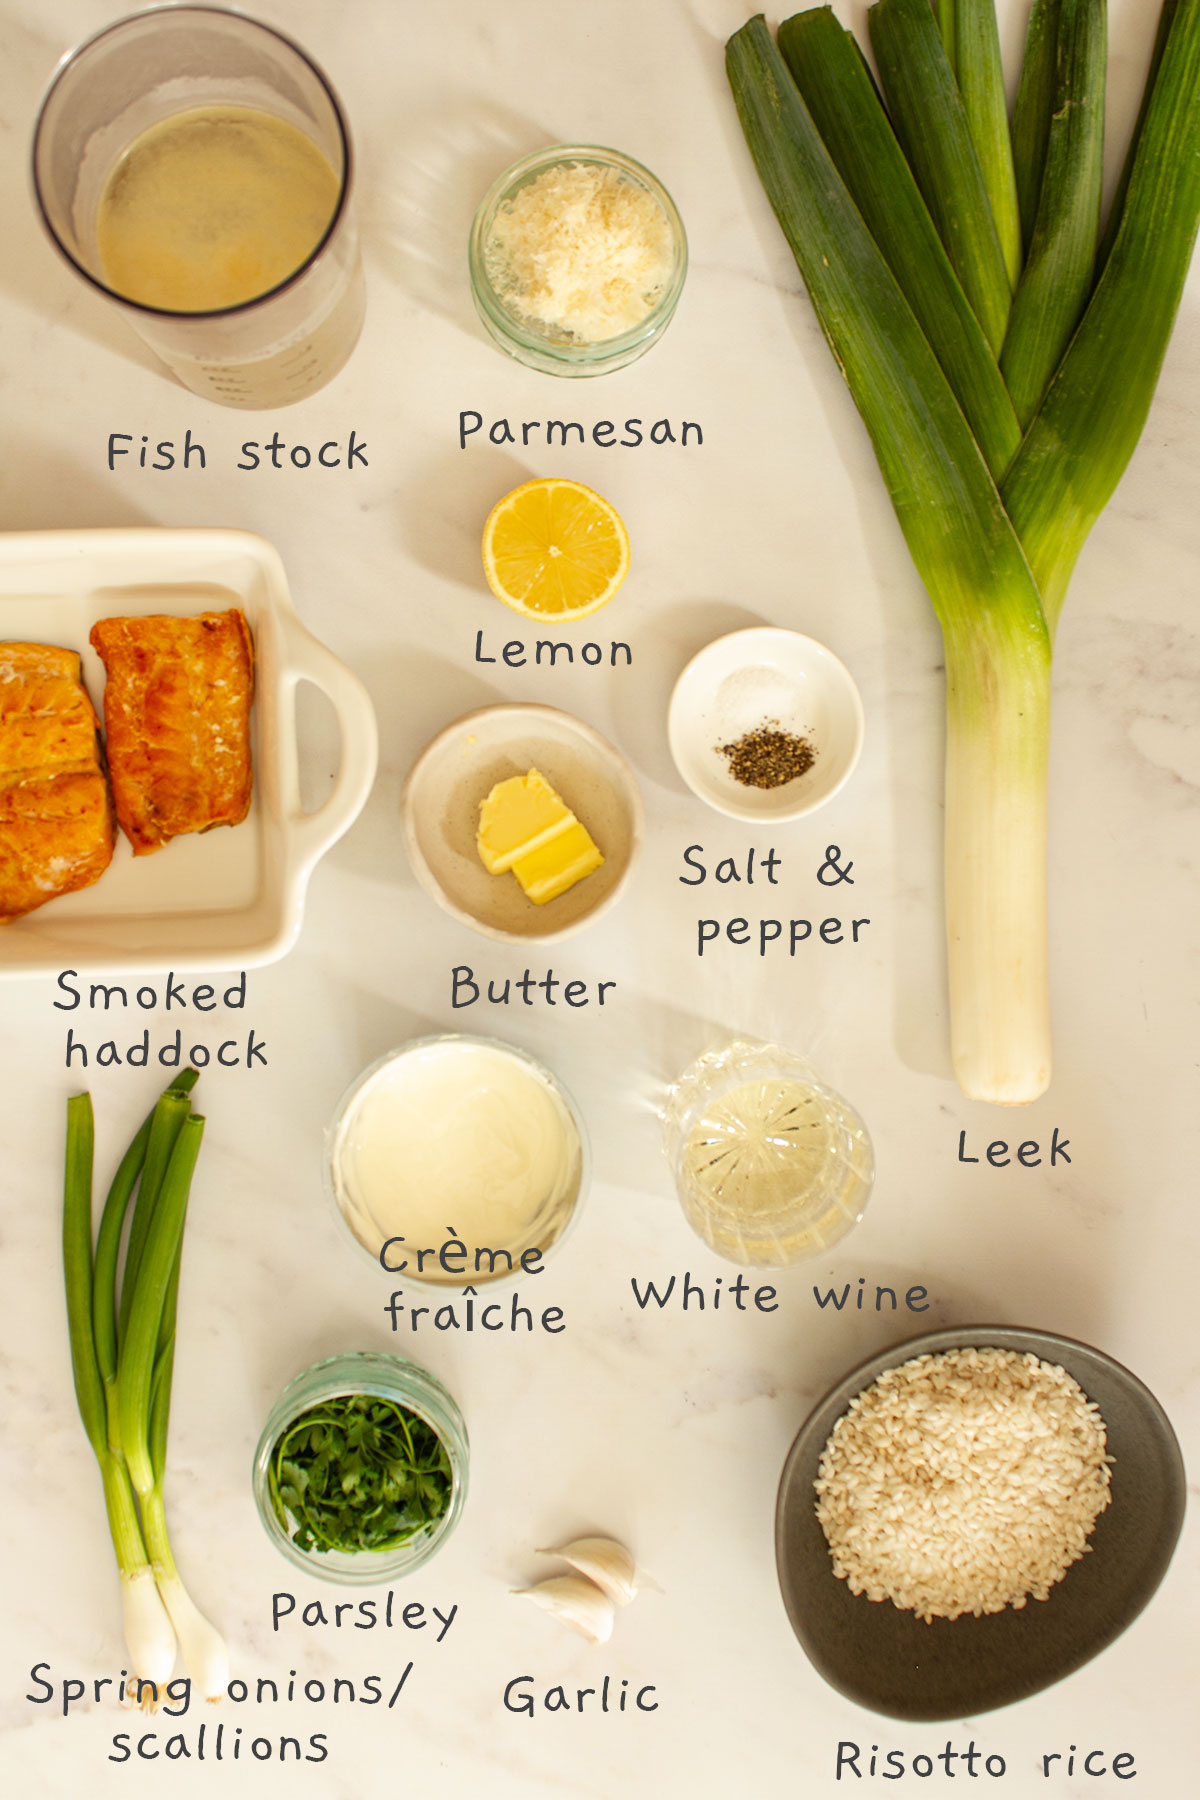 All ingredients laid out on a white background.